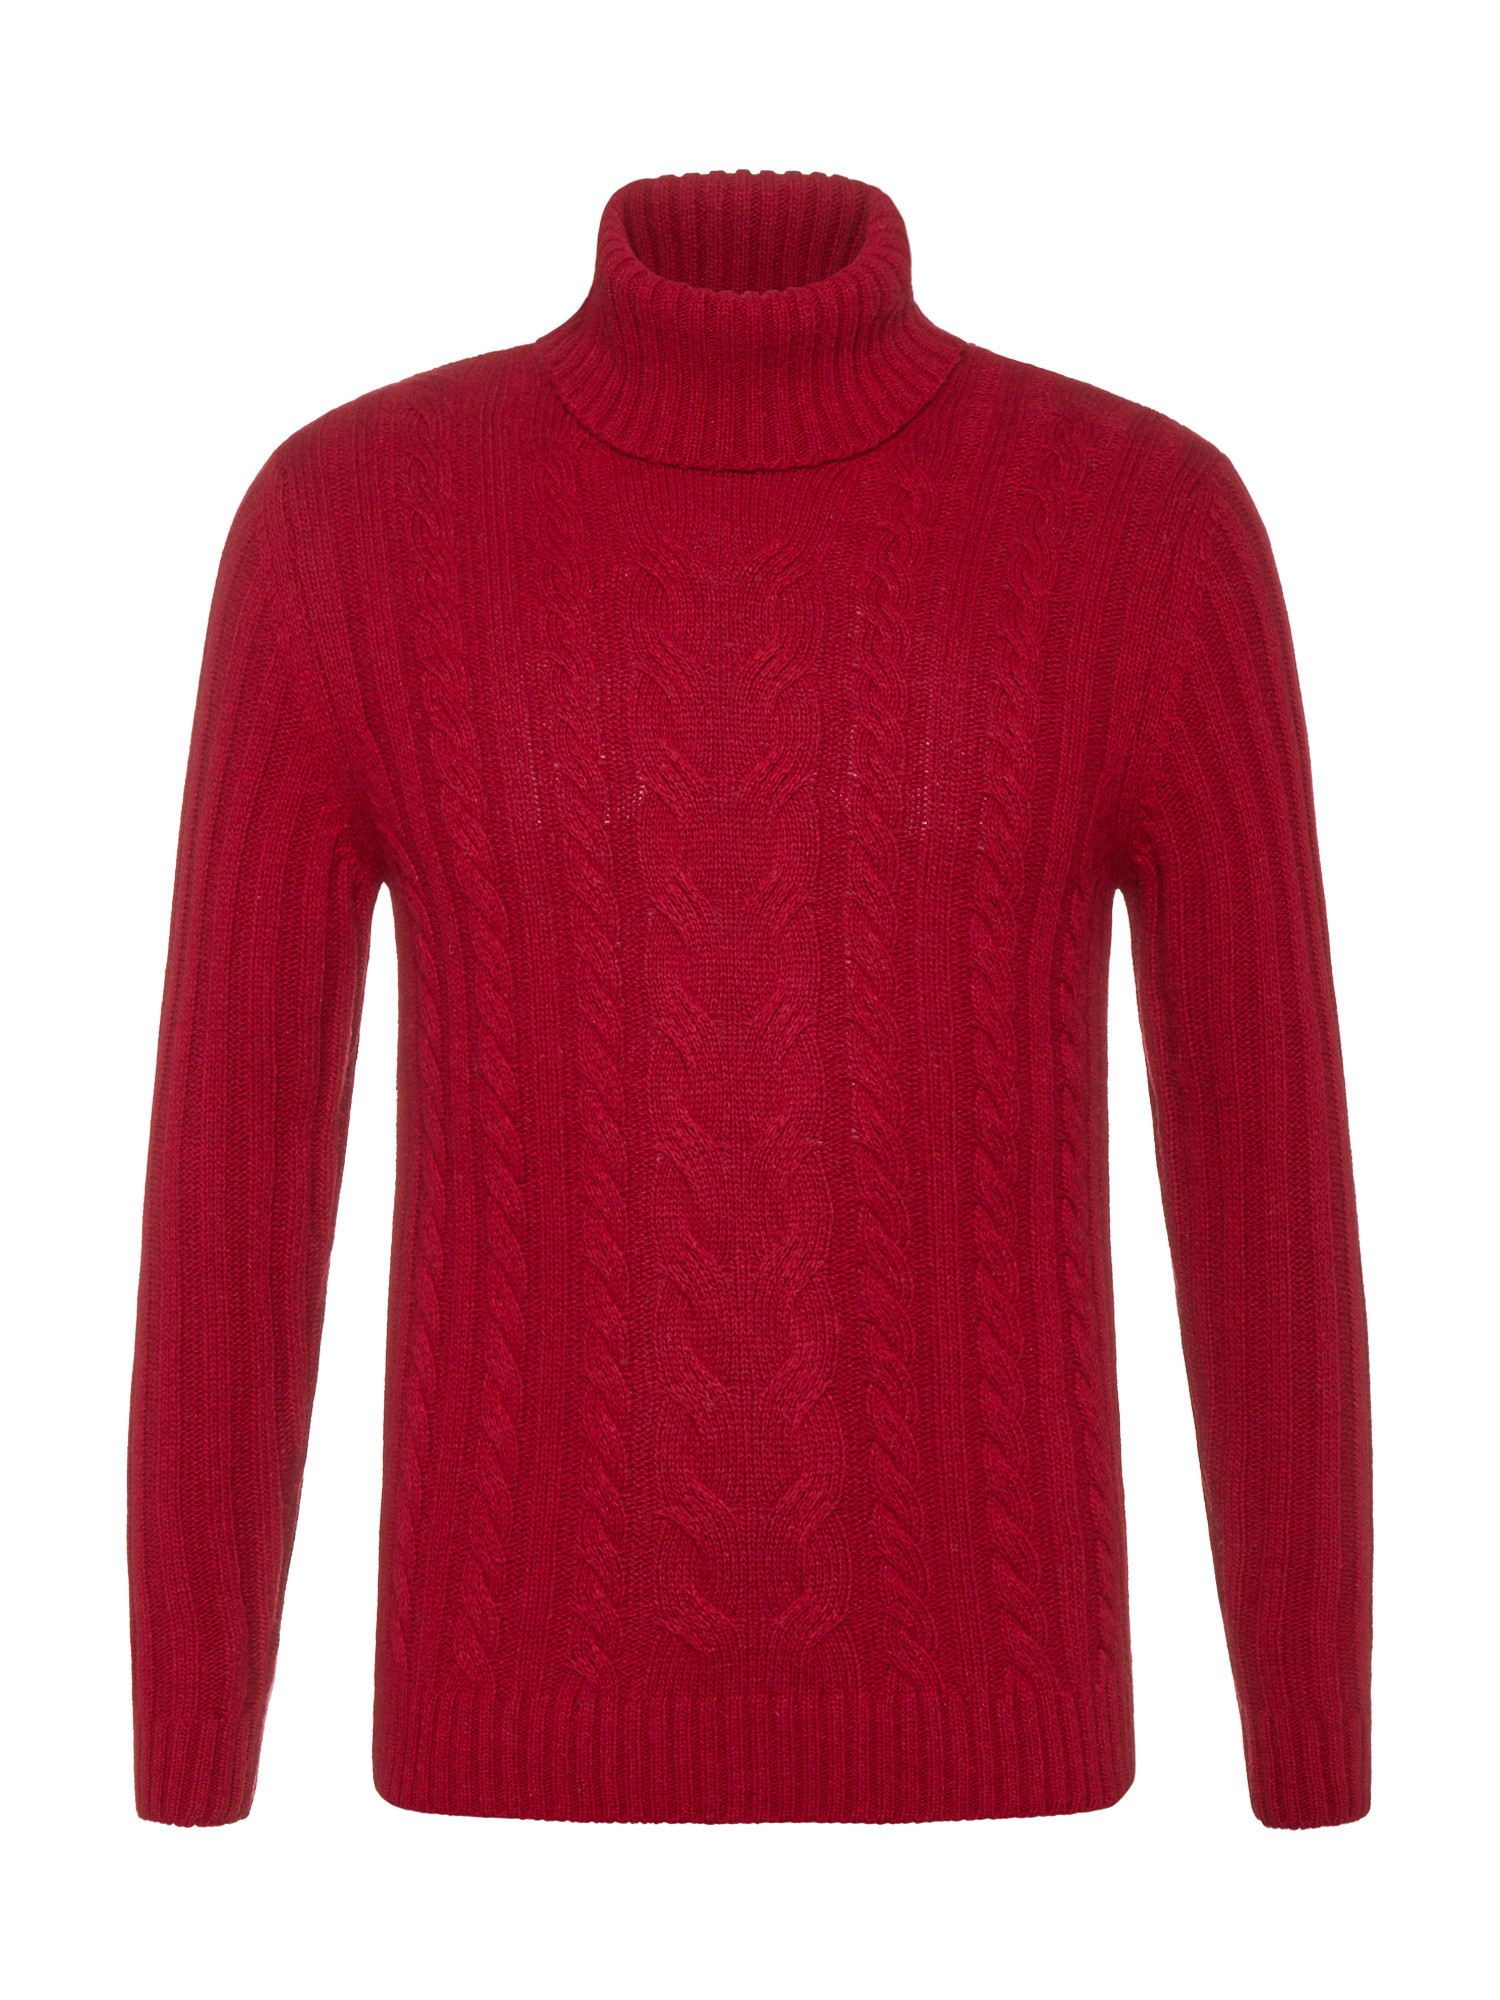 Luca D'Altieri - Recycled wool turtleneck, Red, large image number 0